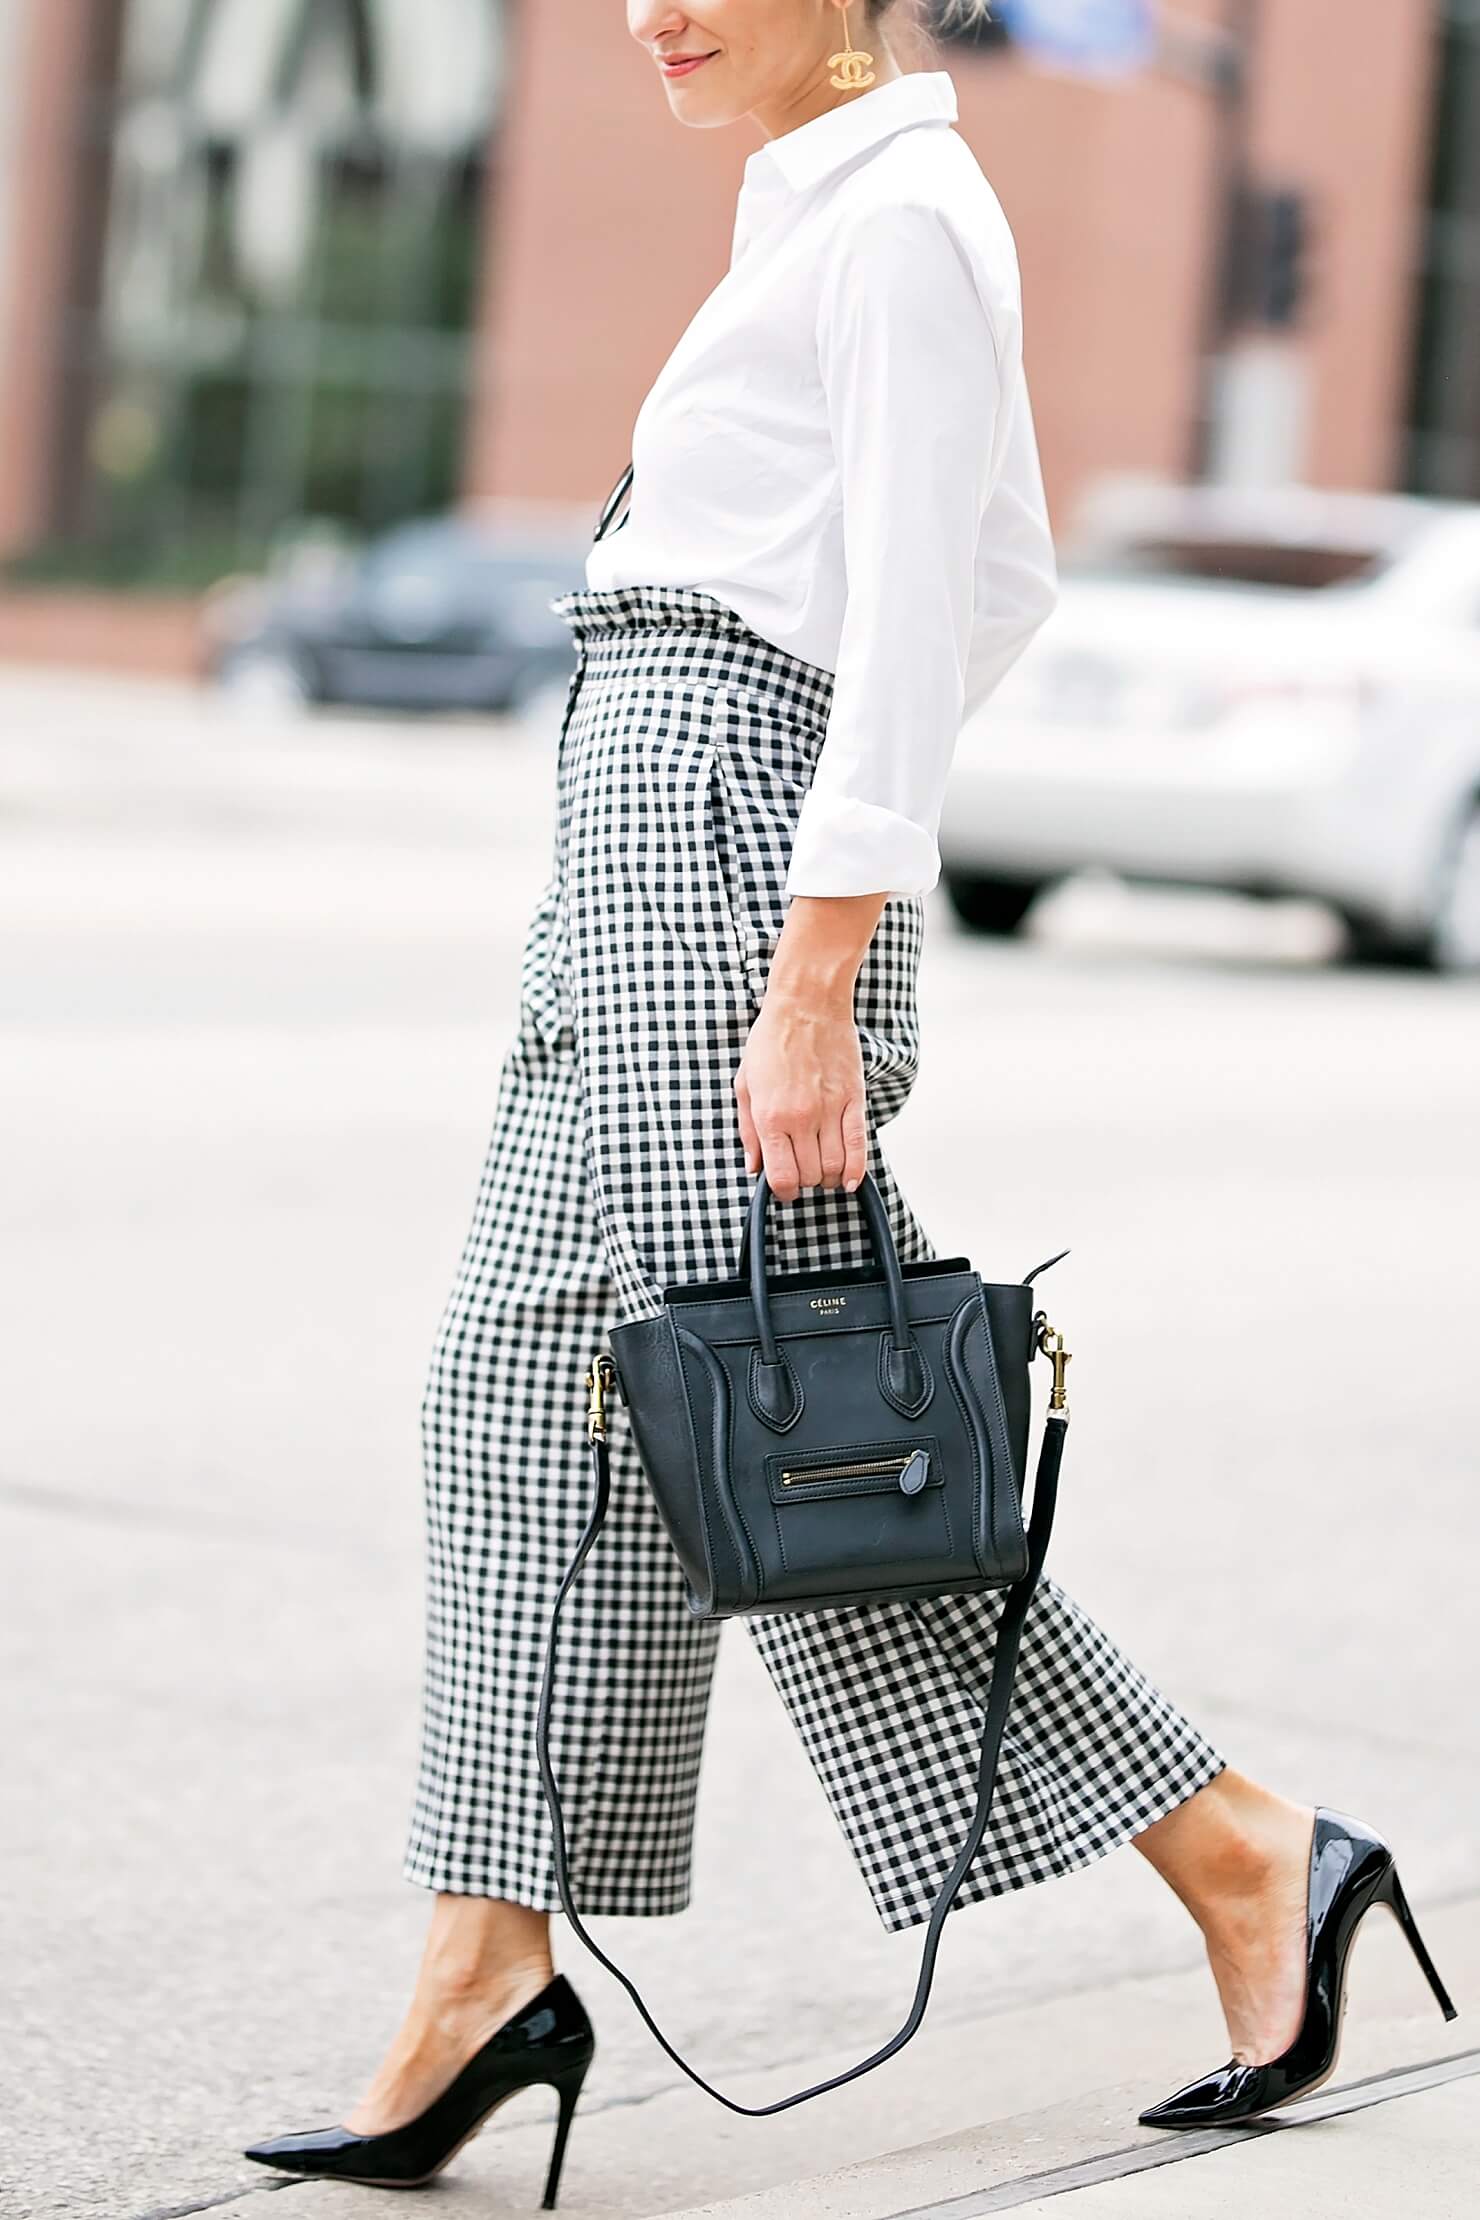 brighton keller wearing gingham pants with white button down and black pointy toe pumps 